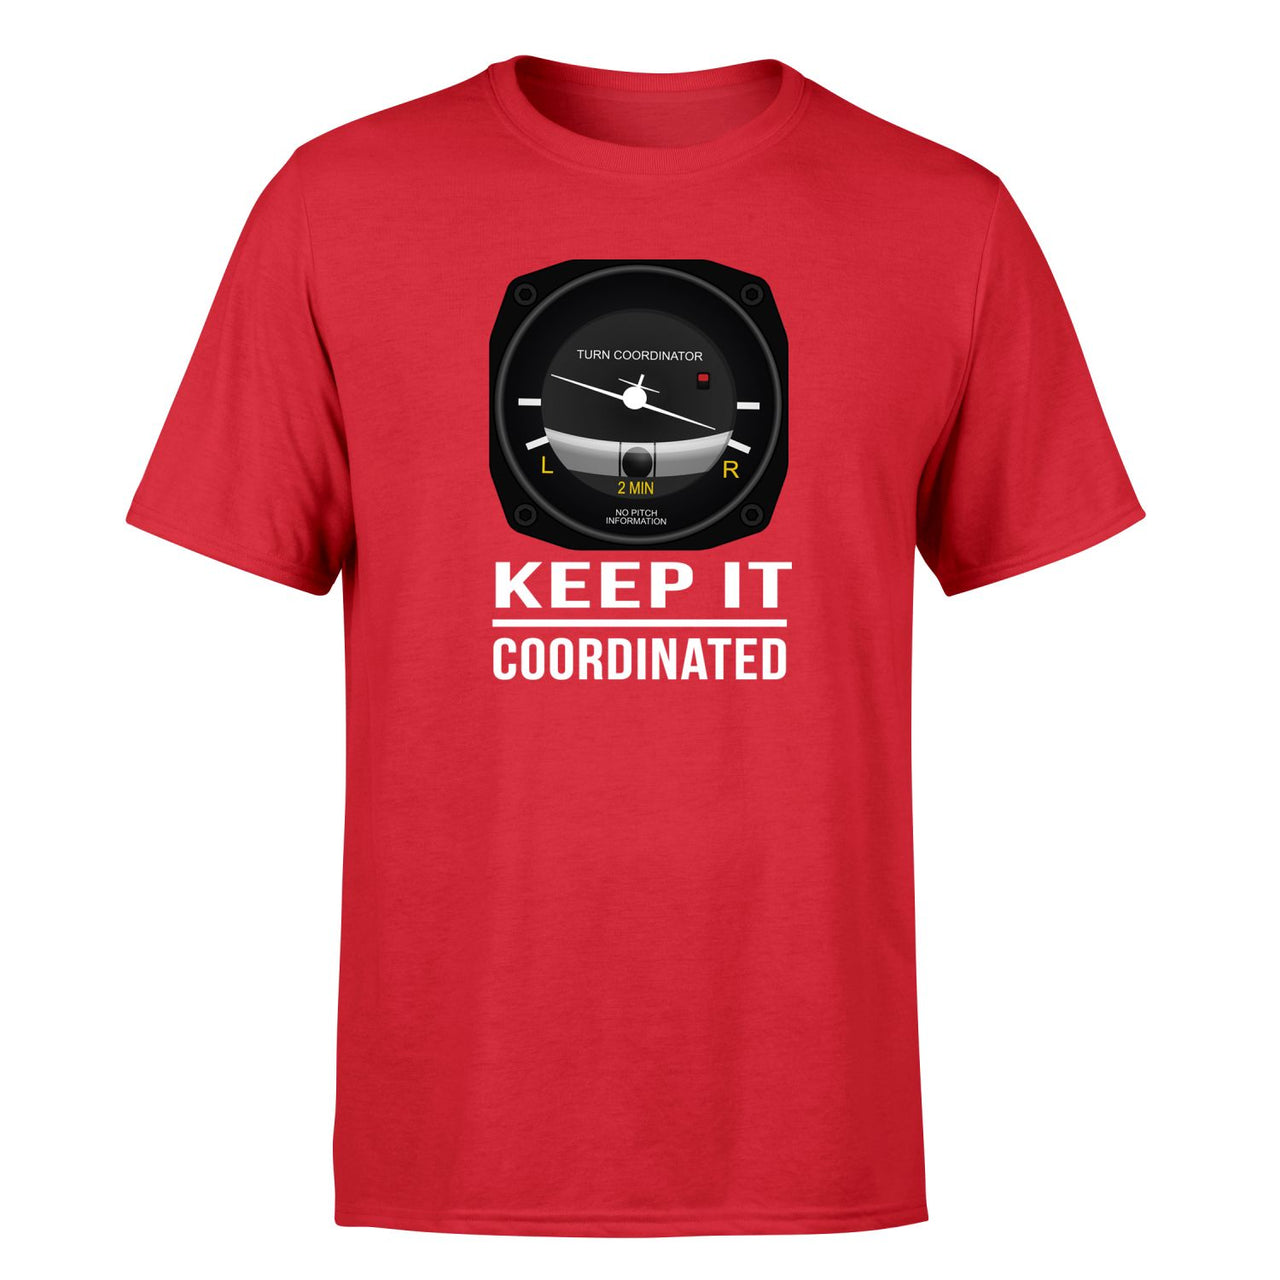 Keep It Coordinated Designed T-Shirts